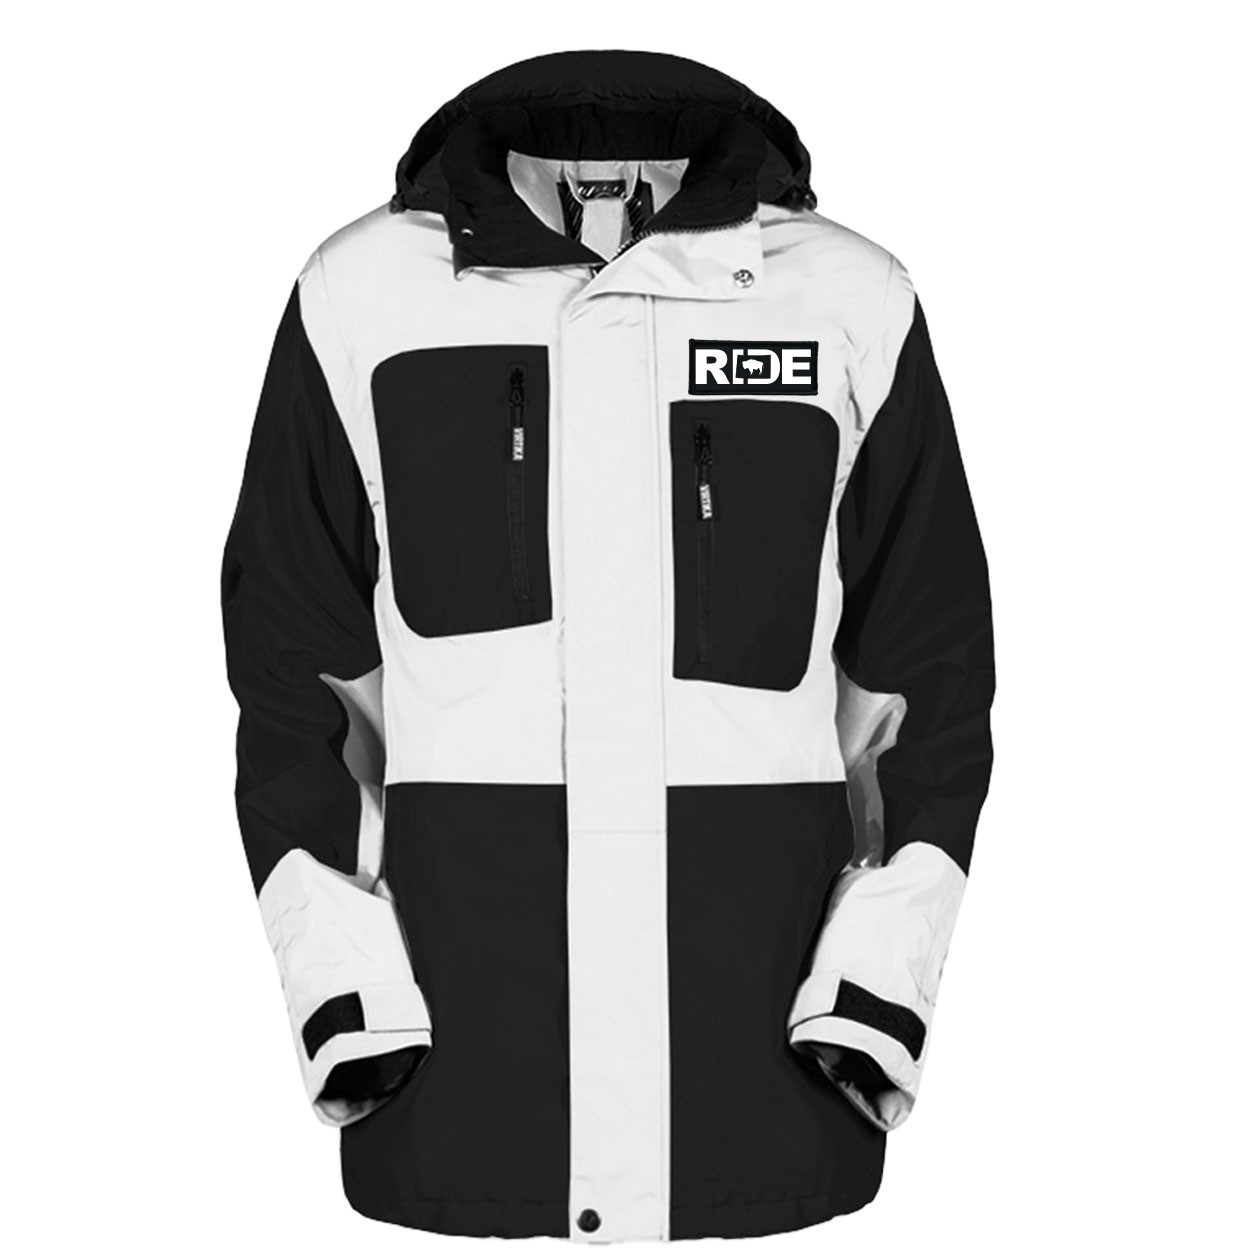 Ride Wyoming Classic Woven Patch Pro Snowboard Jacket (Black/White)